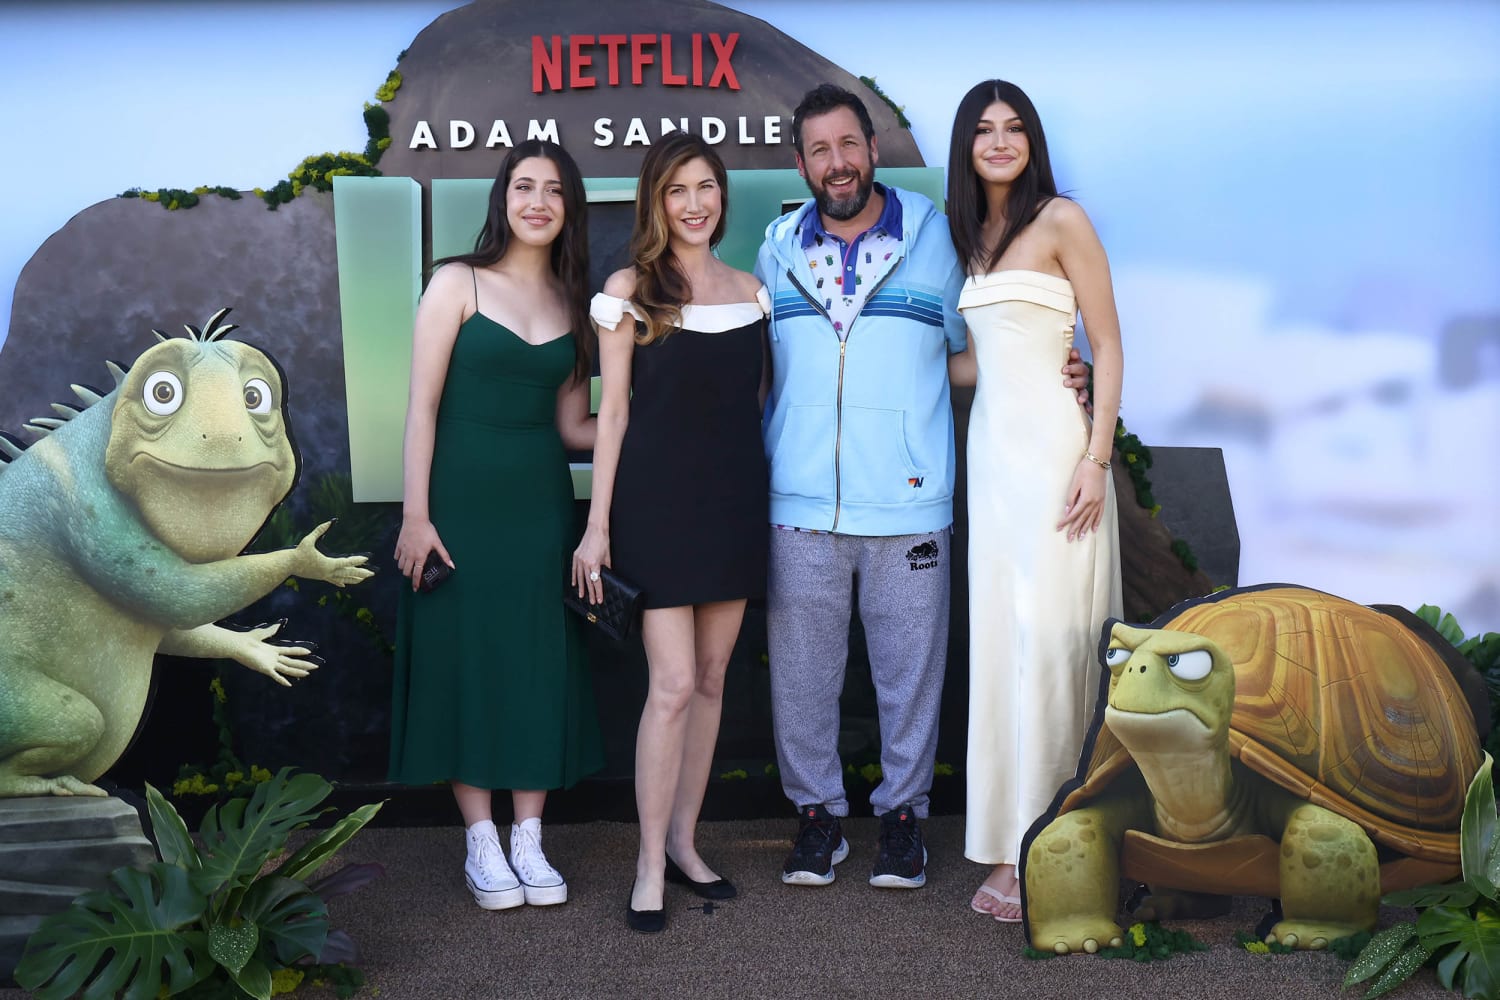 Adam Sandler poses with teen daughters Sadie and Sunny in new family photo